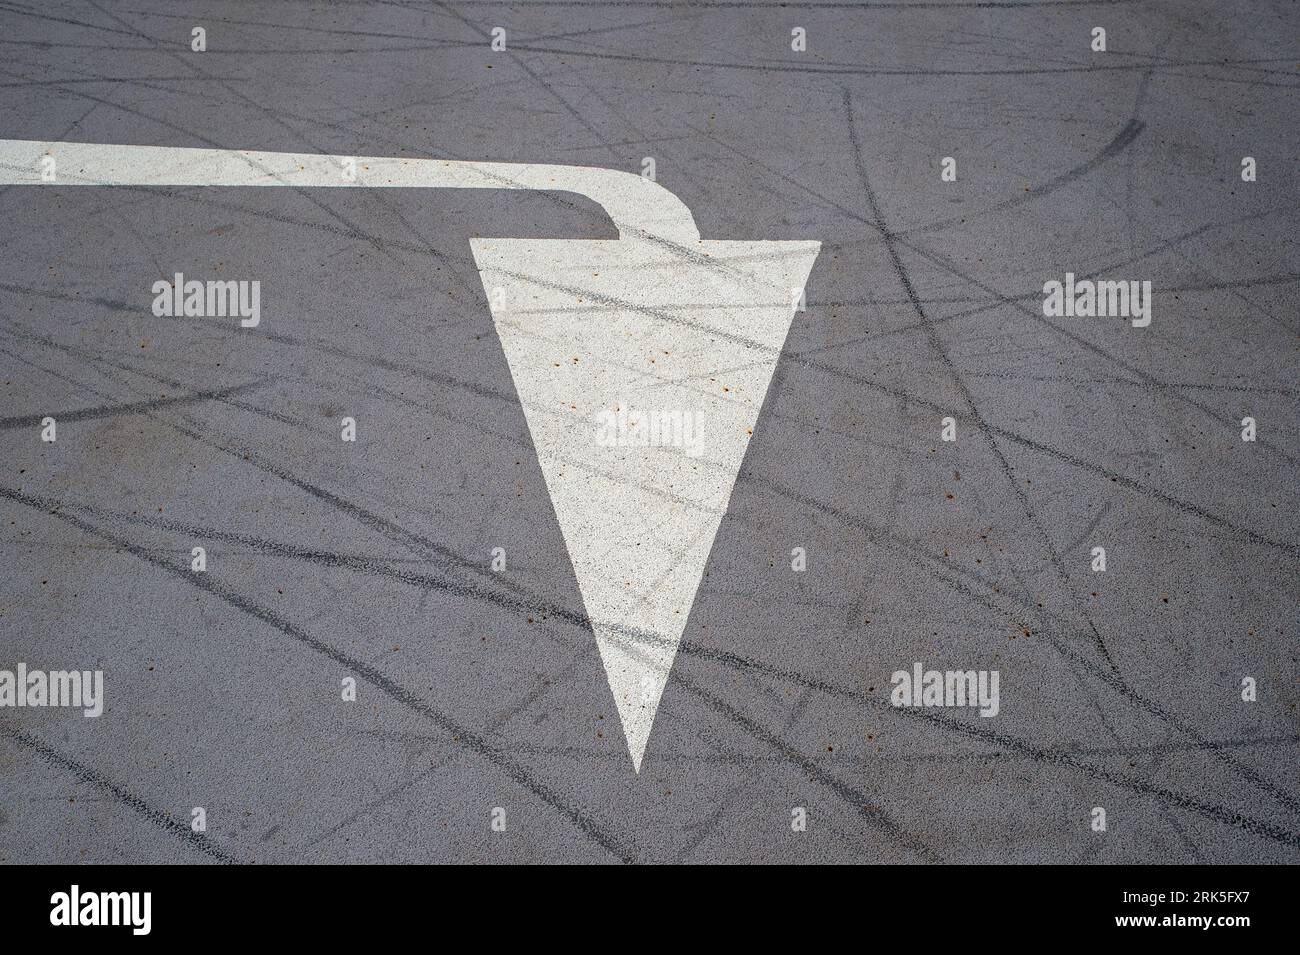 White painted arrow on a road surface, pointing down Stock Photo